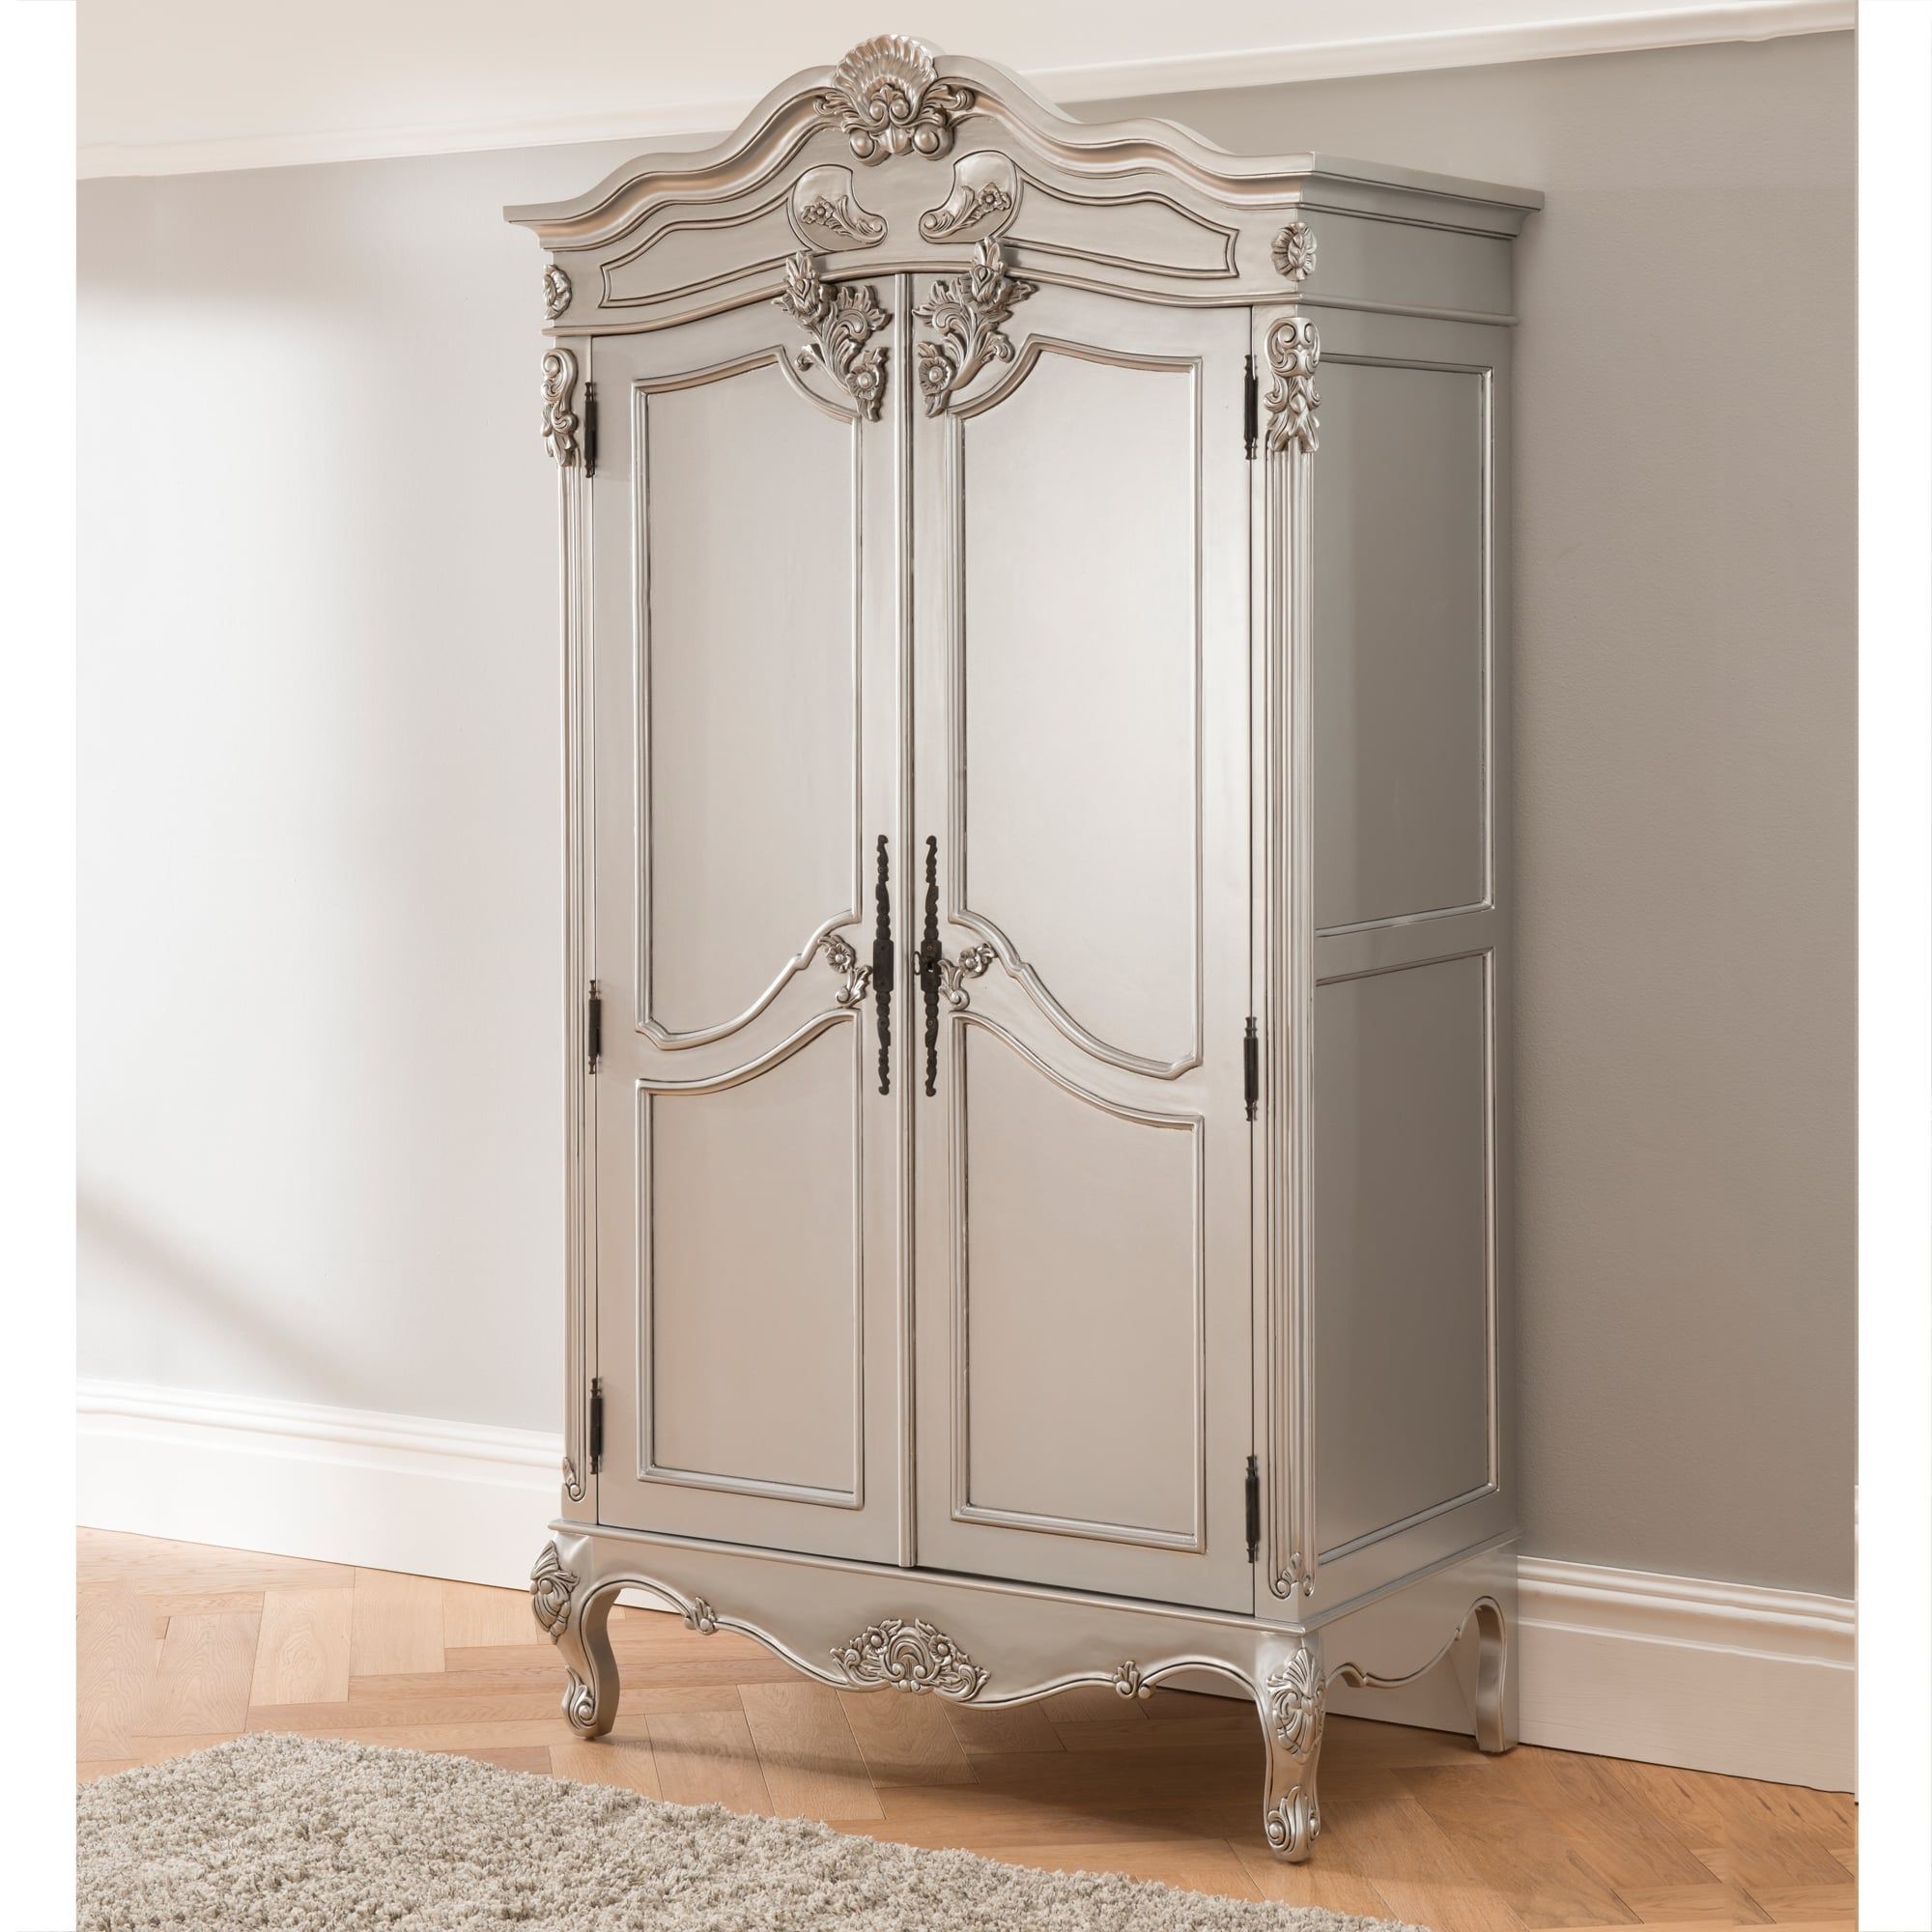 Baroque Antique French Style Wardrobe | Shabby Chic Wardrobe, French  Antiques, French Furniture Bedroom For Vintage Shabby Chic Wardrobes (View 8 of 15)